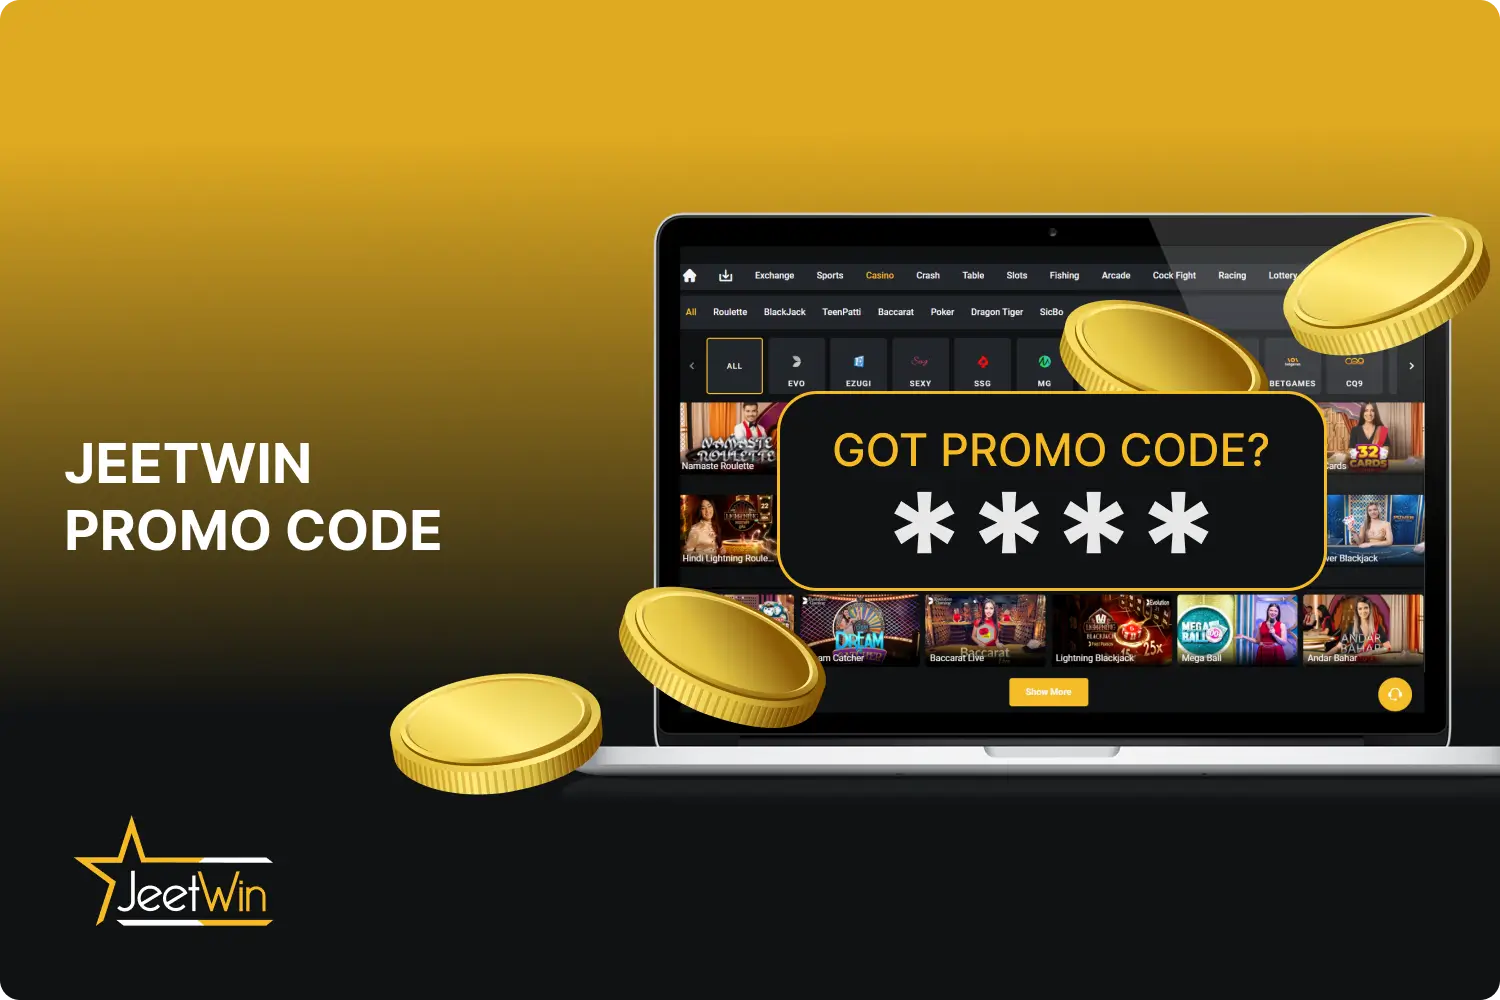 New Jeetwin users from India get nice bonuses with promo code